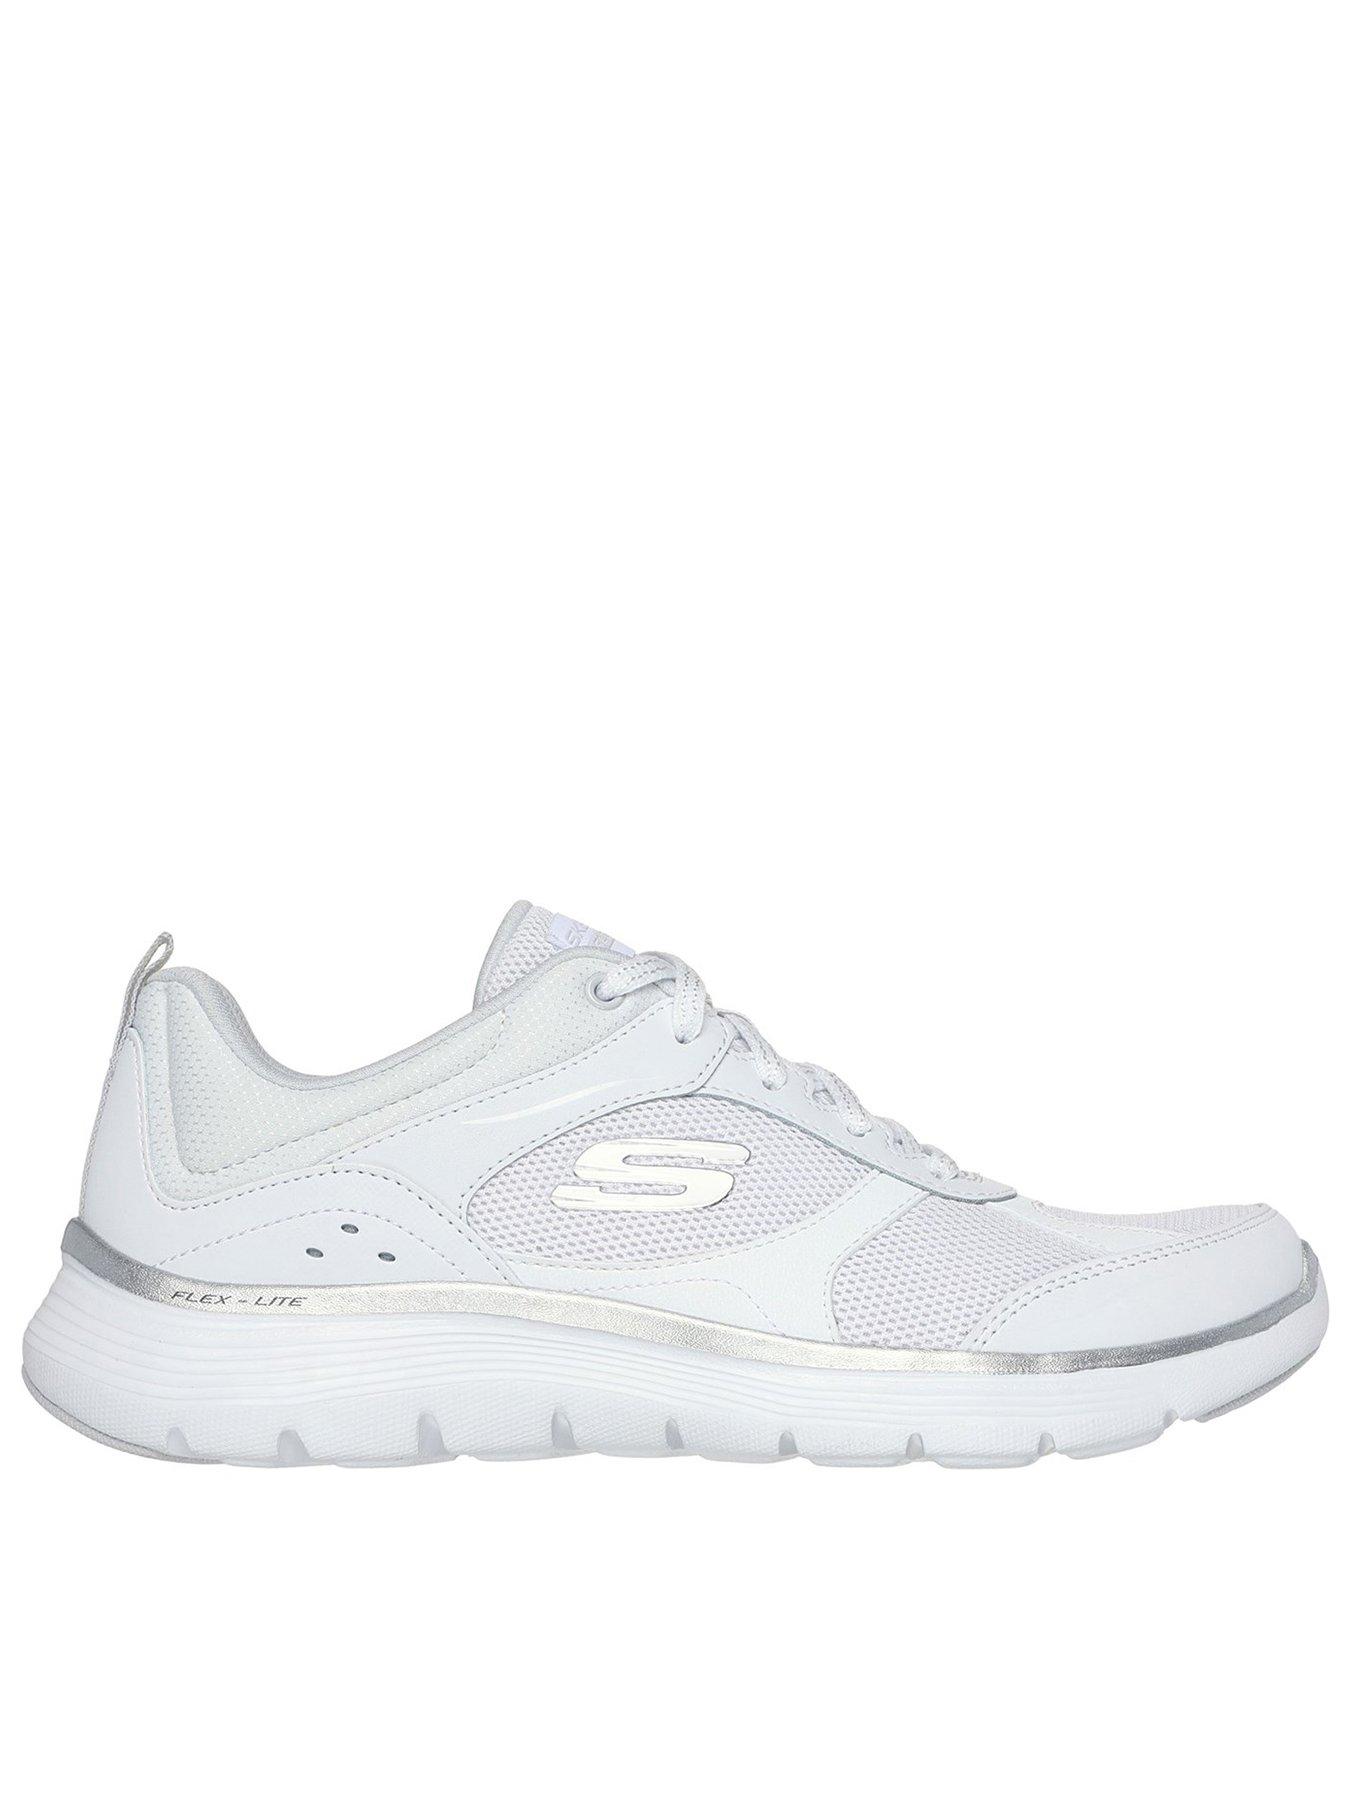 Skechers Flex Appeal 5.0 Mesh Lace up Trainers - White, White, Size 4, Women